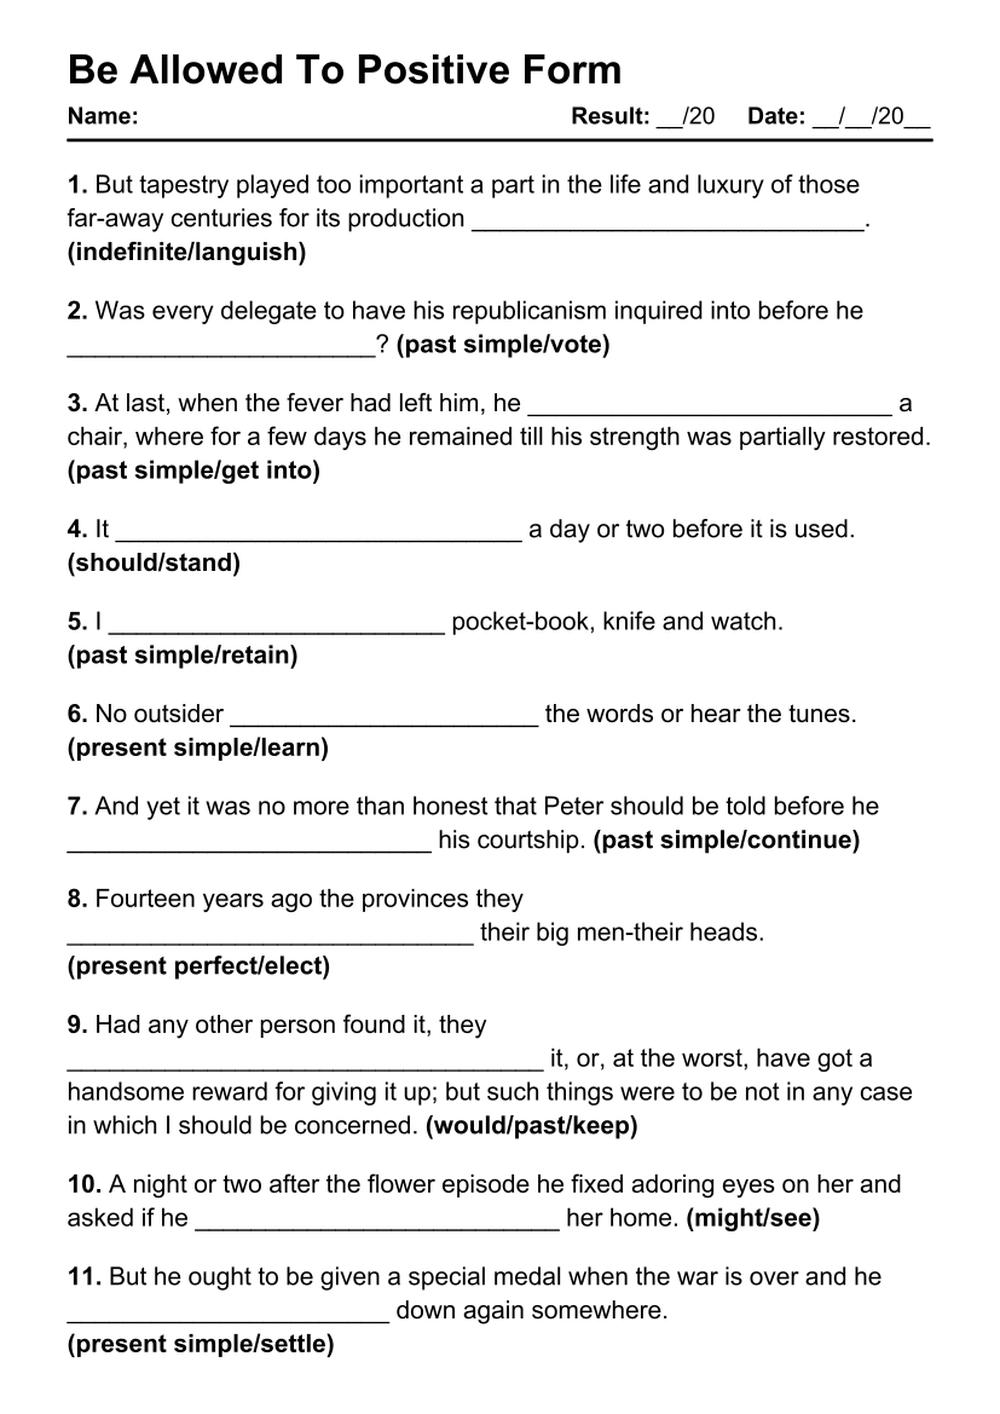 Printable Be Allowed To Positive Exercises - PDF Worksheet with Answers - Test 52